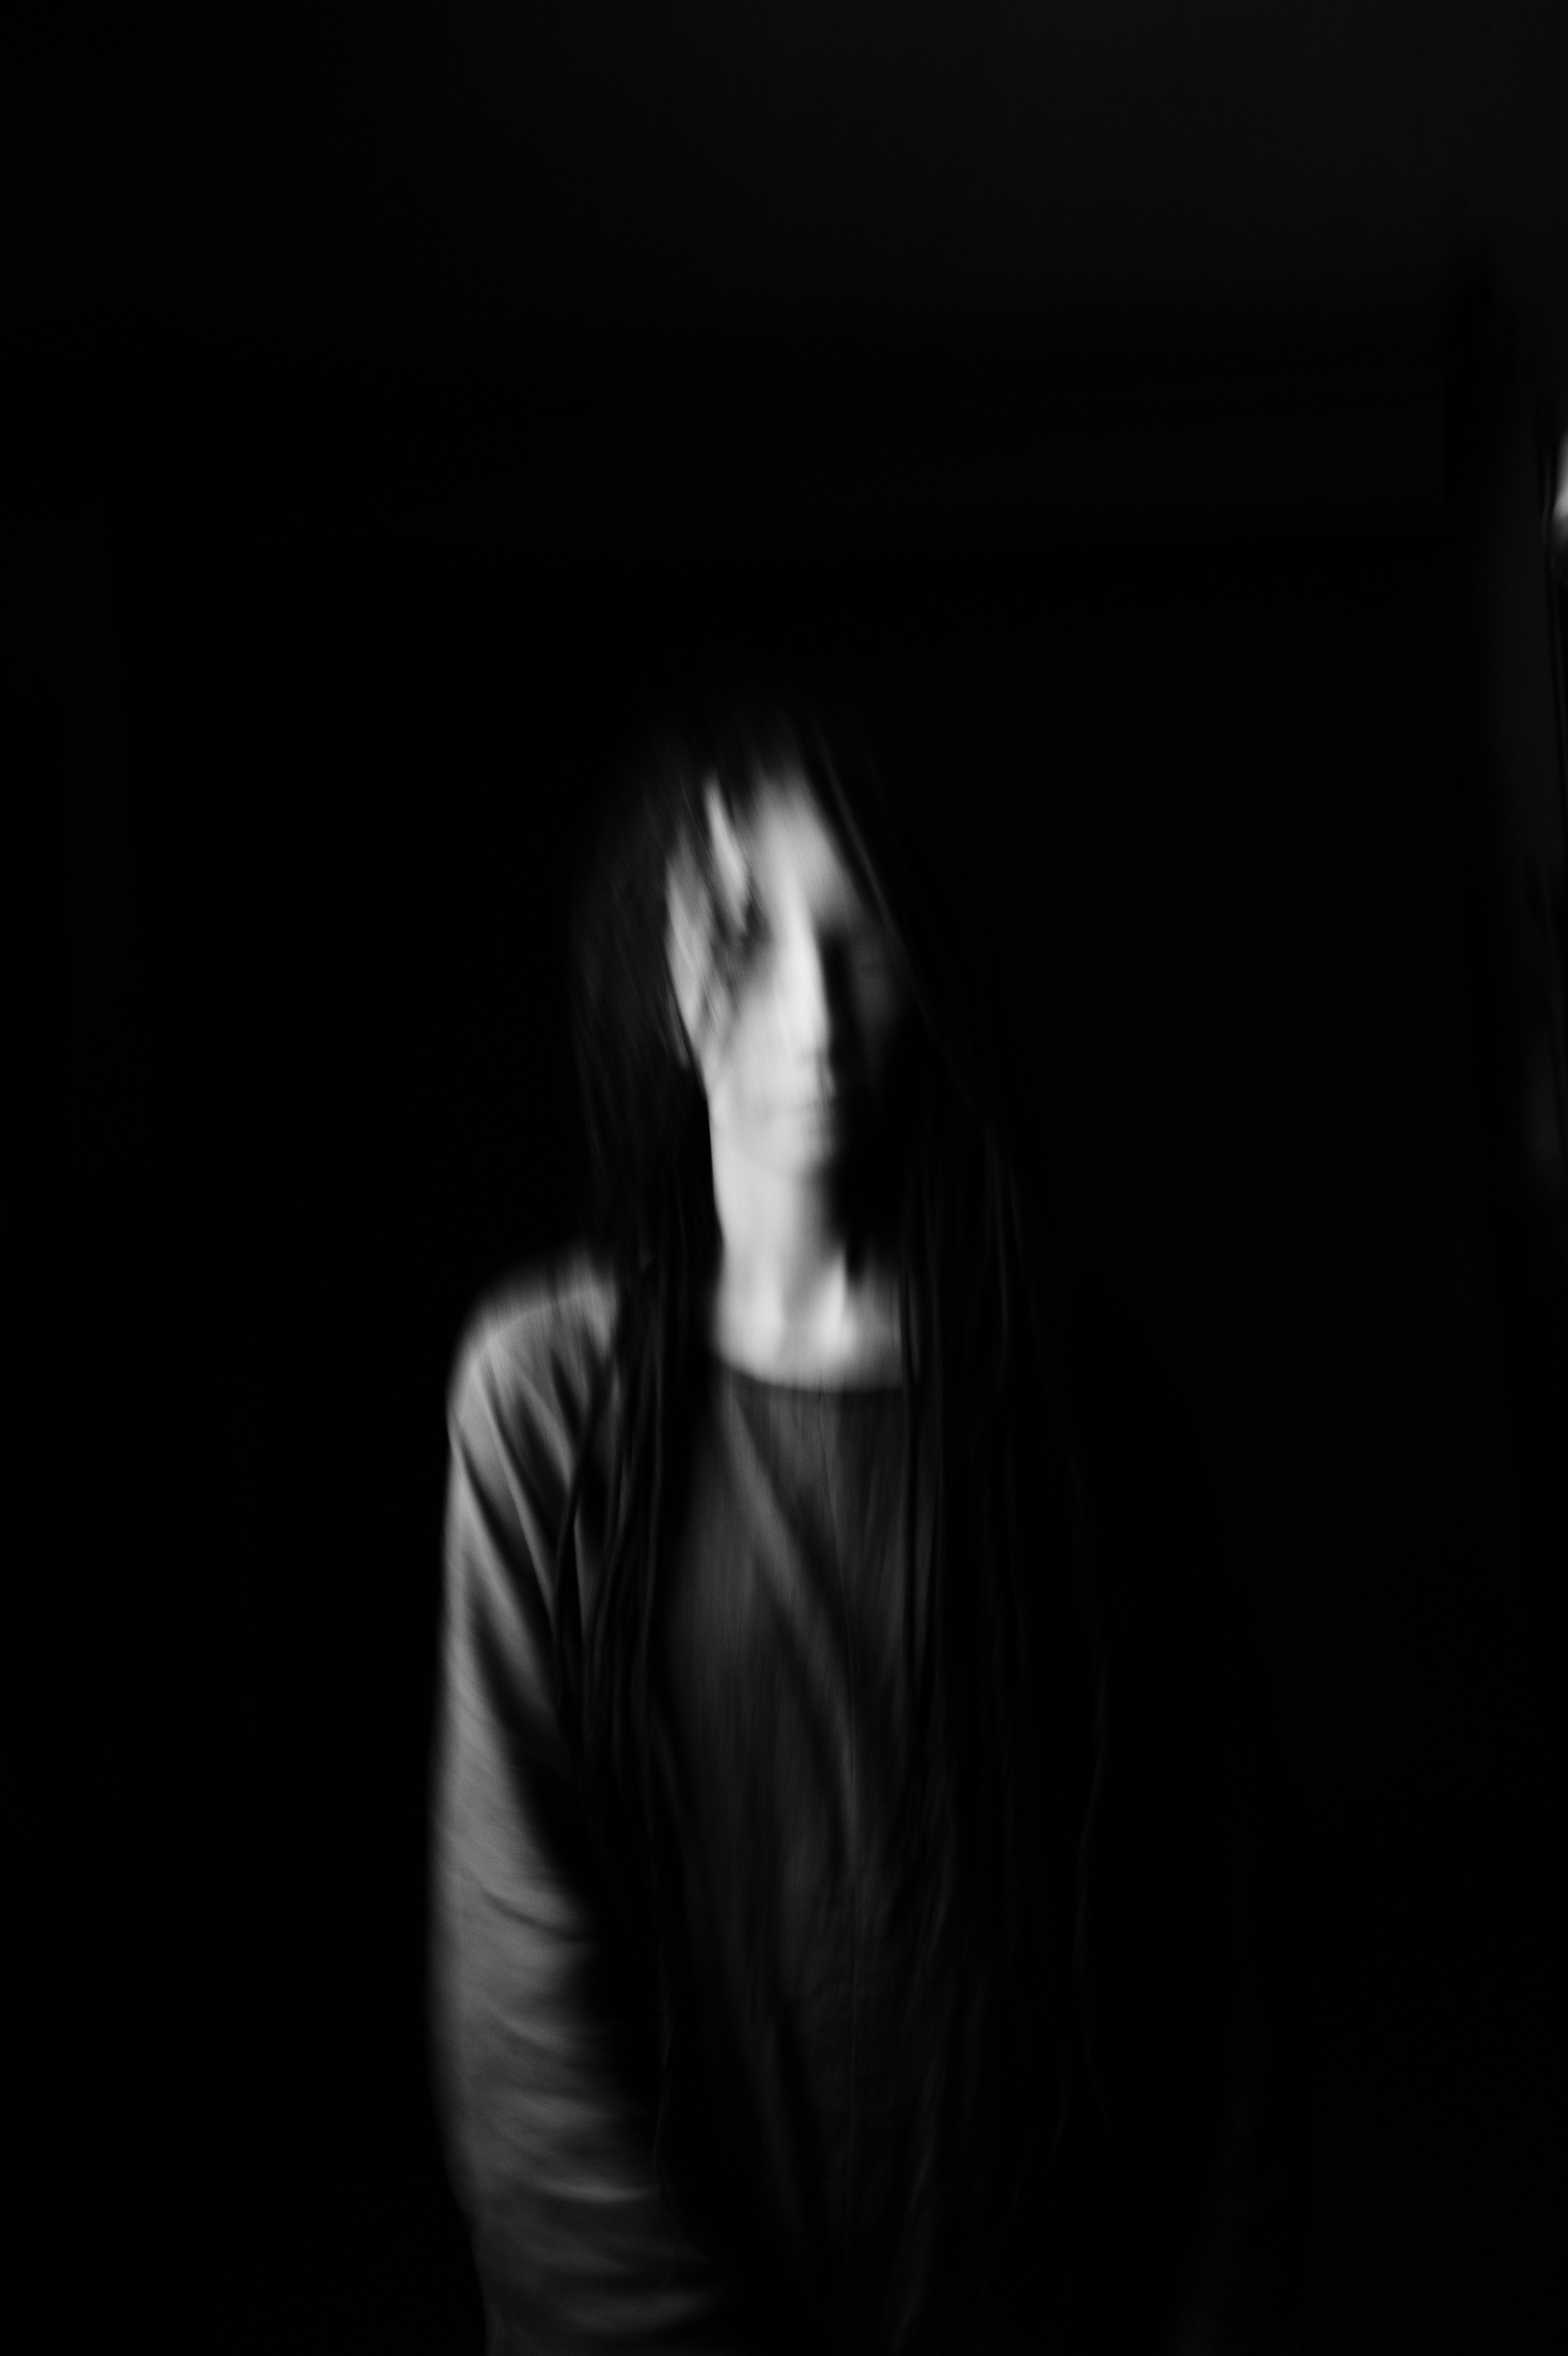 A woman with long hair in a black and white photo. - Black, black and white, dark phone, blurry